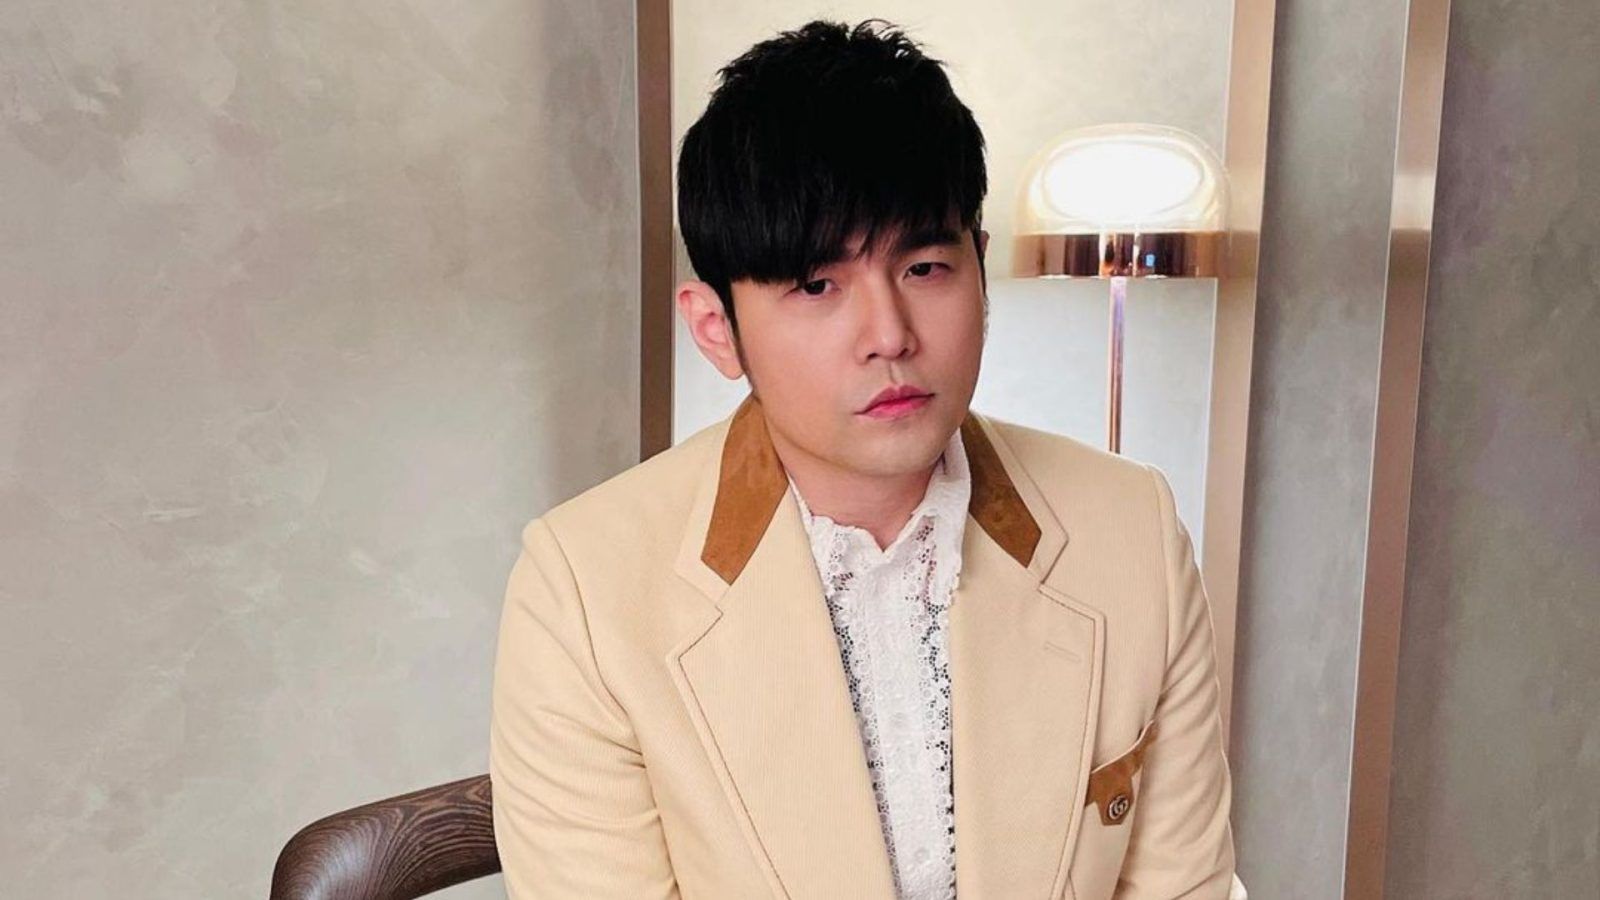 Jay Chou Hong Kong concert Dates, tickets and other details